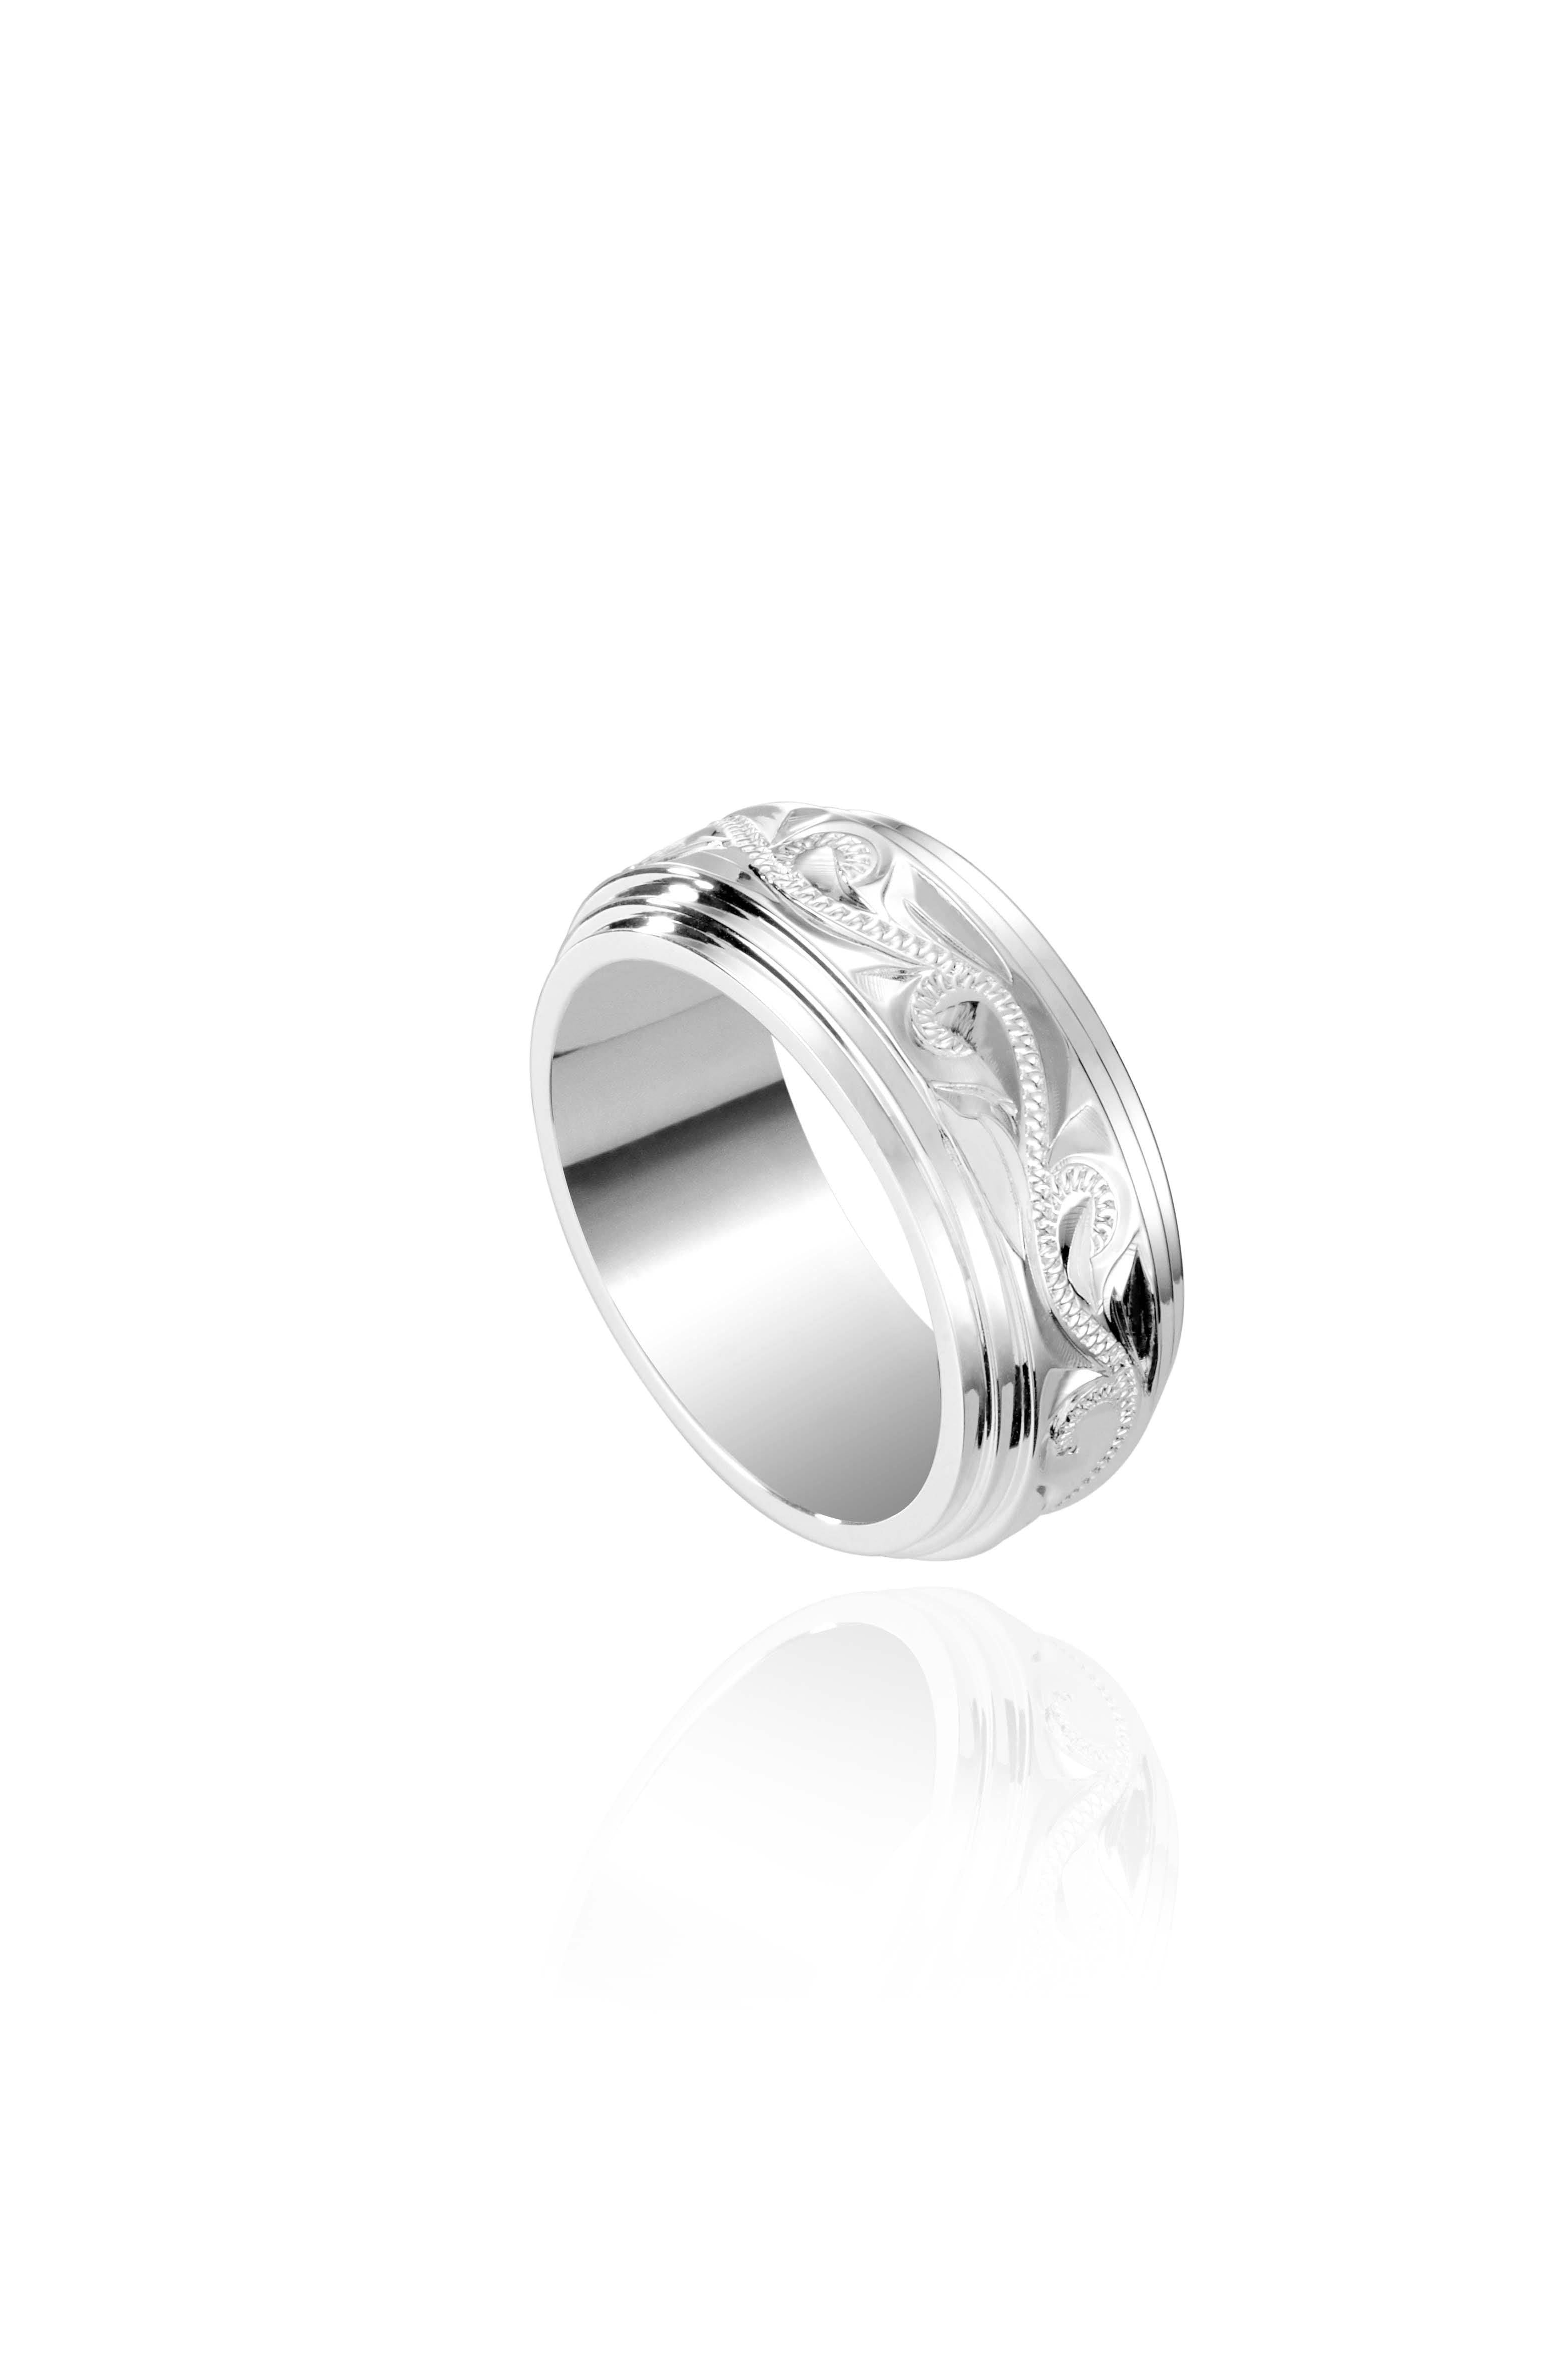 The picture shows a 925 sterling silver 8 mm ring with hand engravings of scrolls.